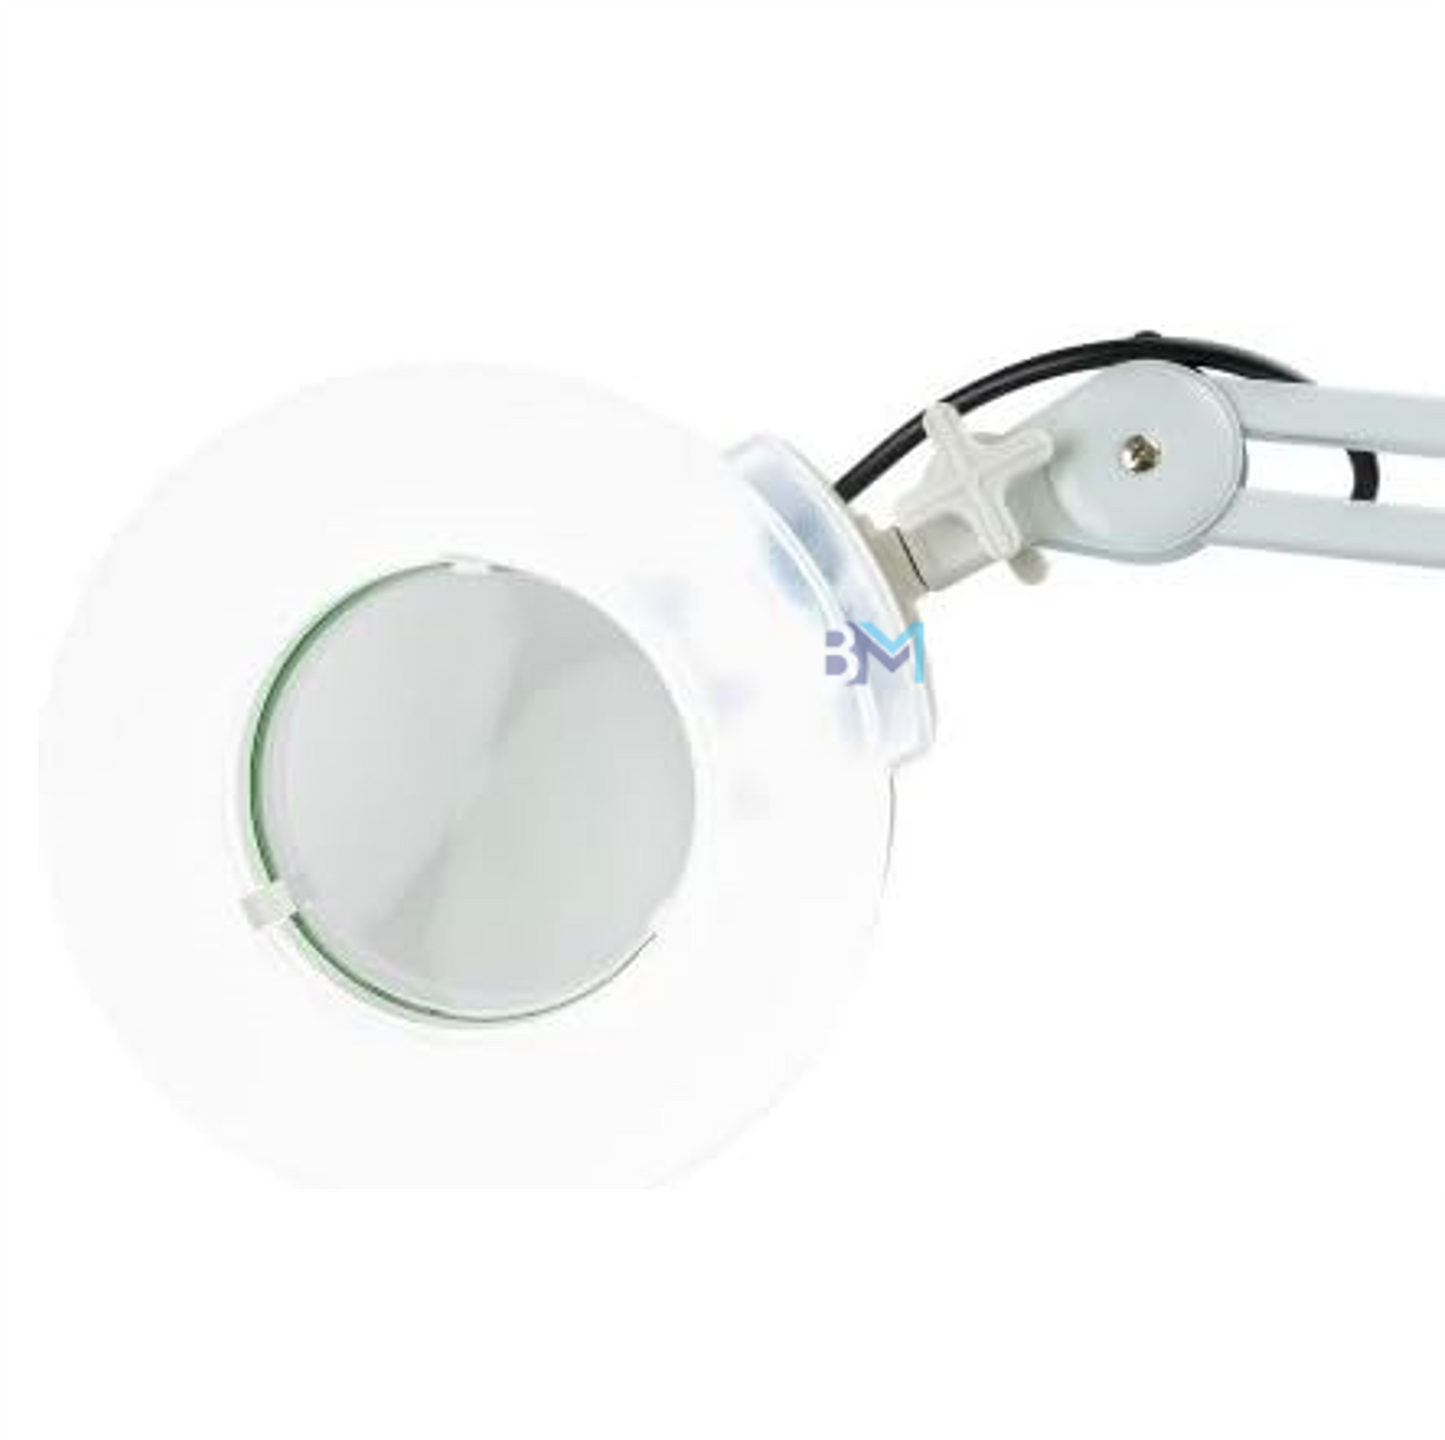 ROLLING LED MAGNIFIER WITH 3 INCREASES ➡Ref: 206001-2-S